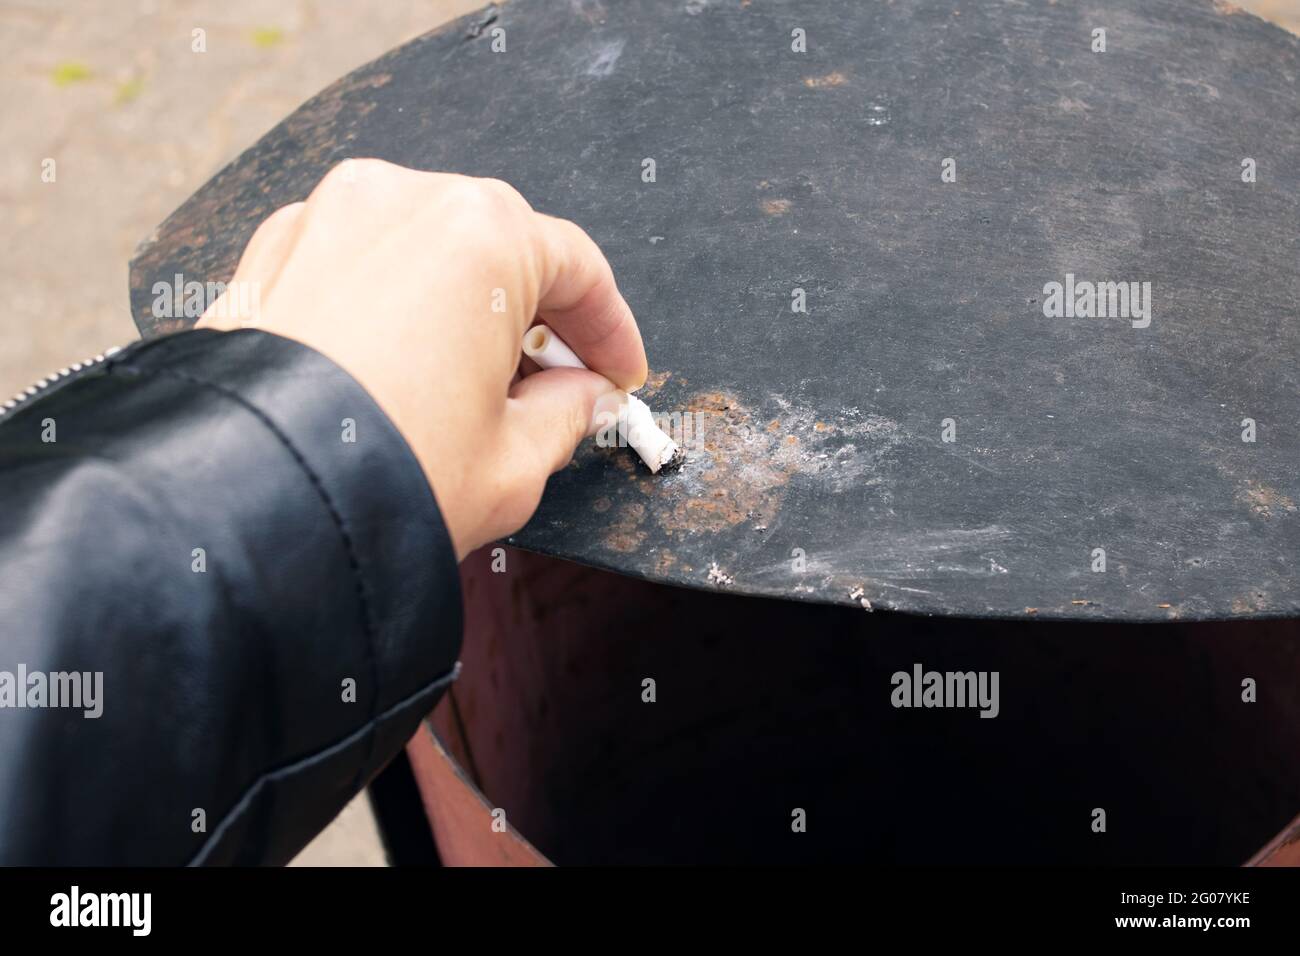 Hand extinguishes a cigarette on the trash can close up Stock Photo